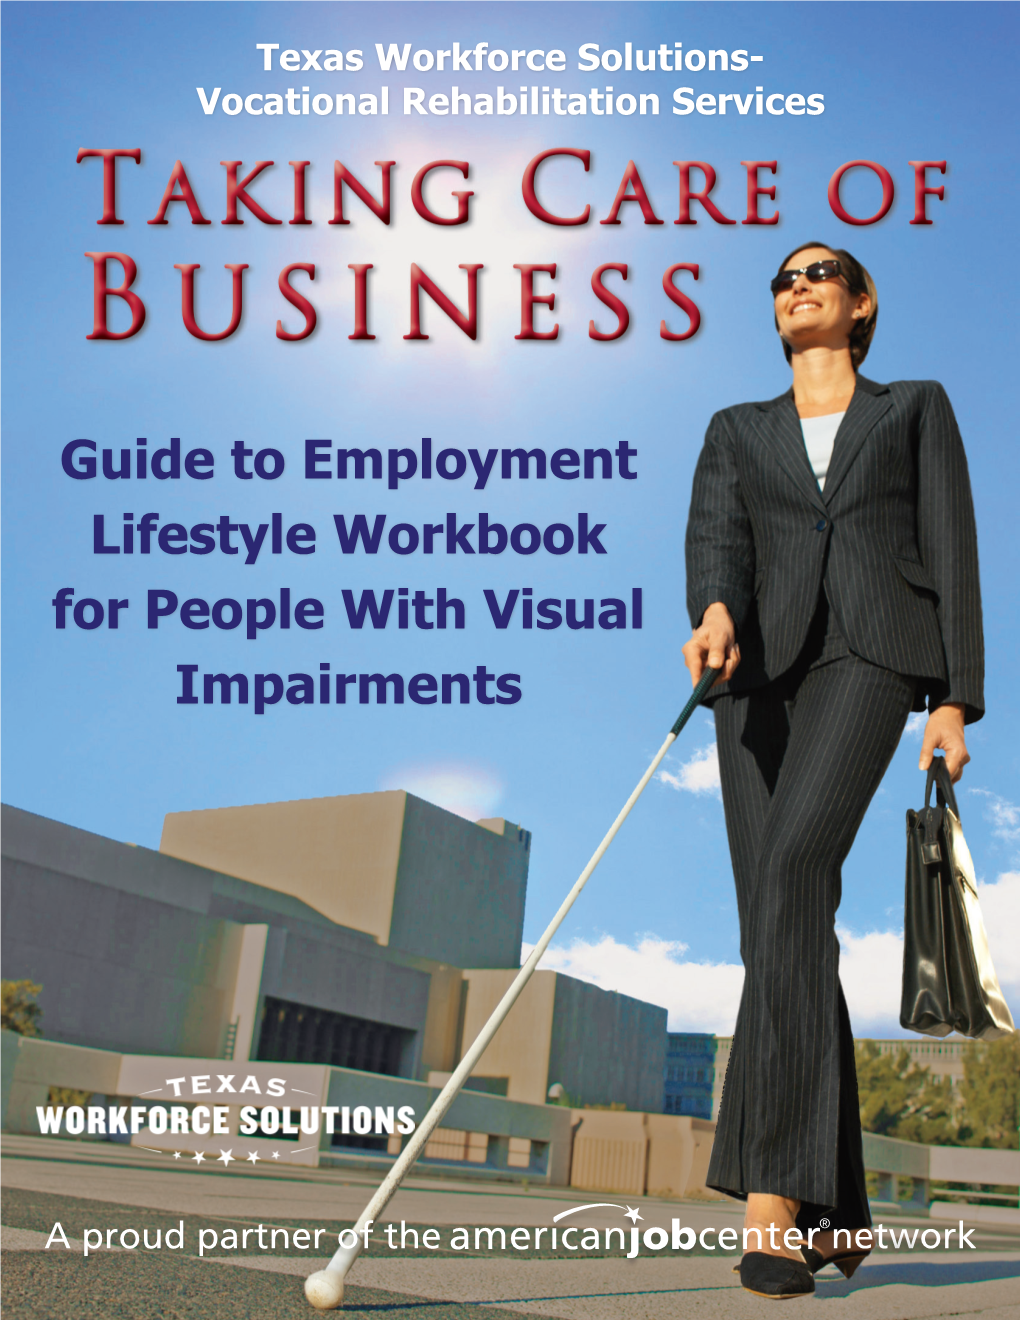 Guide to Employment Lifestyle Workbook for People with Visual Impairments Chapter 1: the Employment Lifestyle